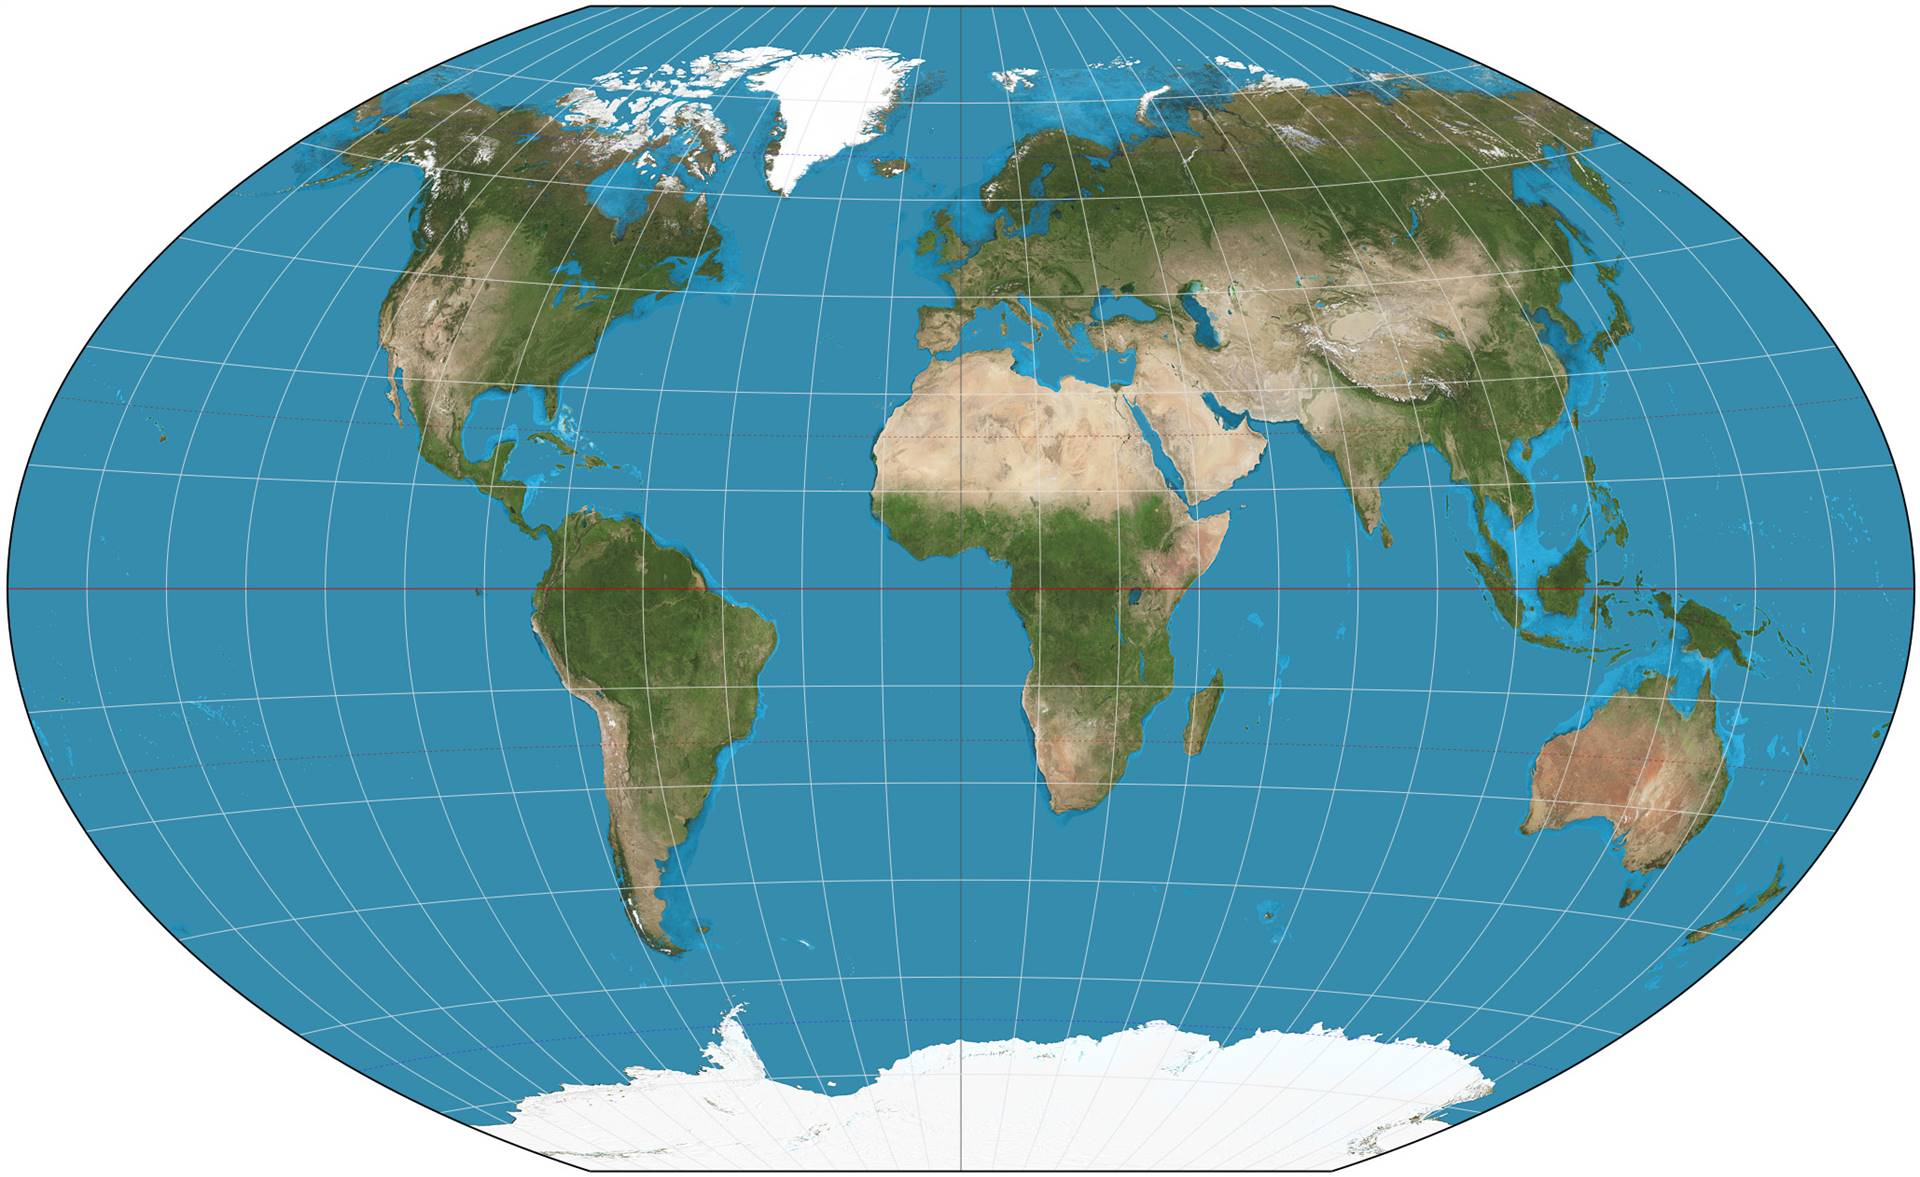 The World Map